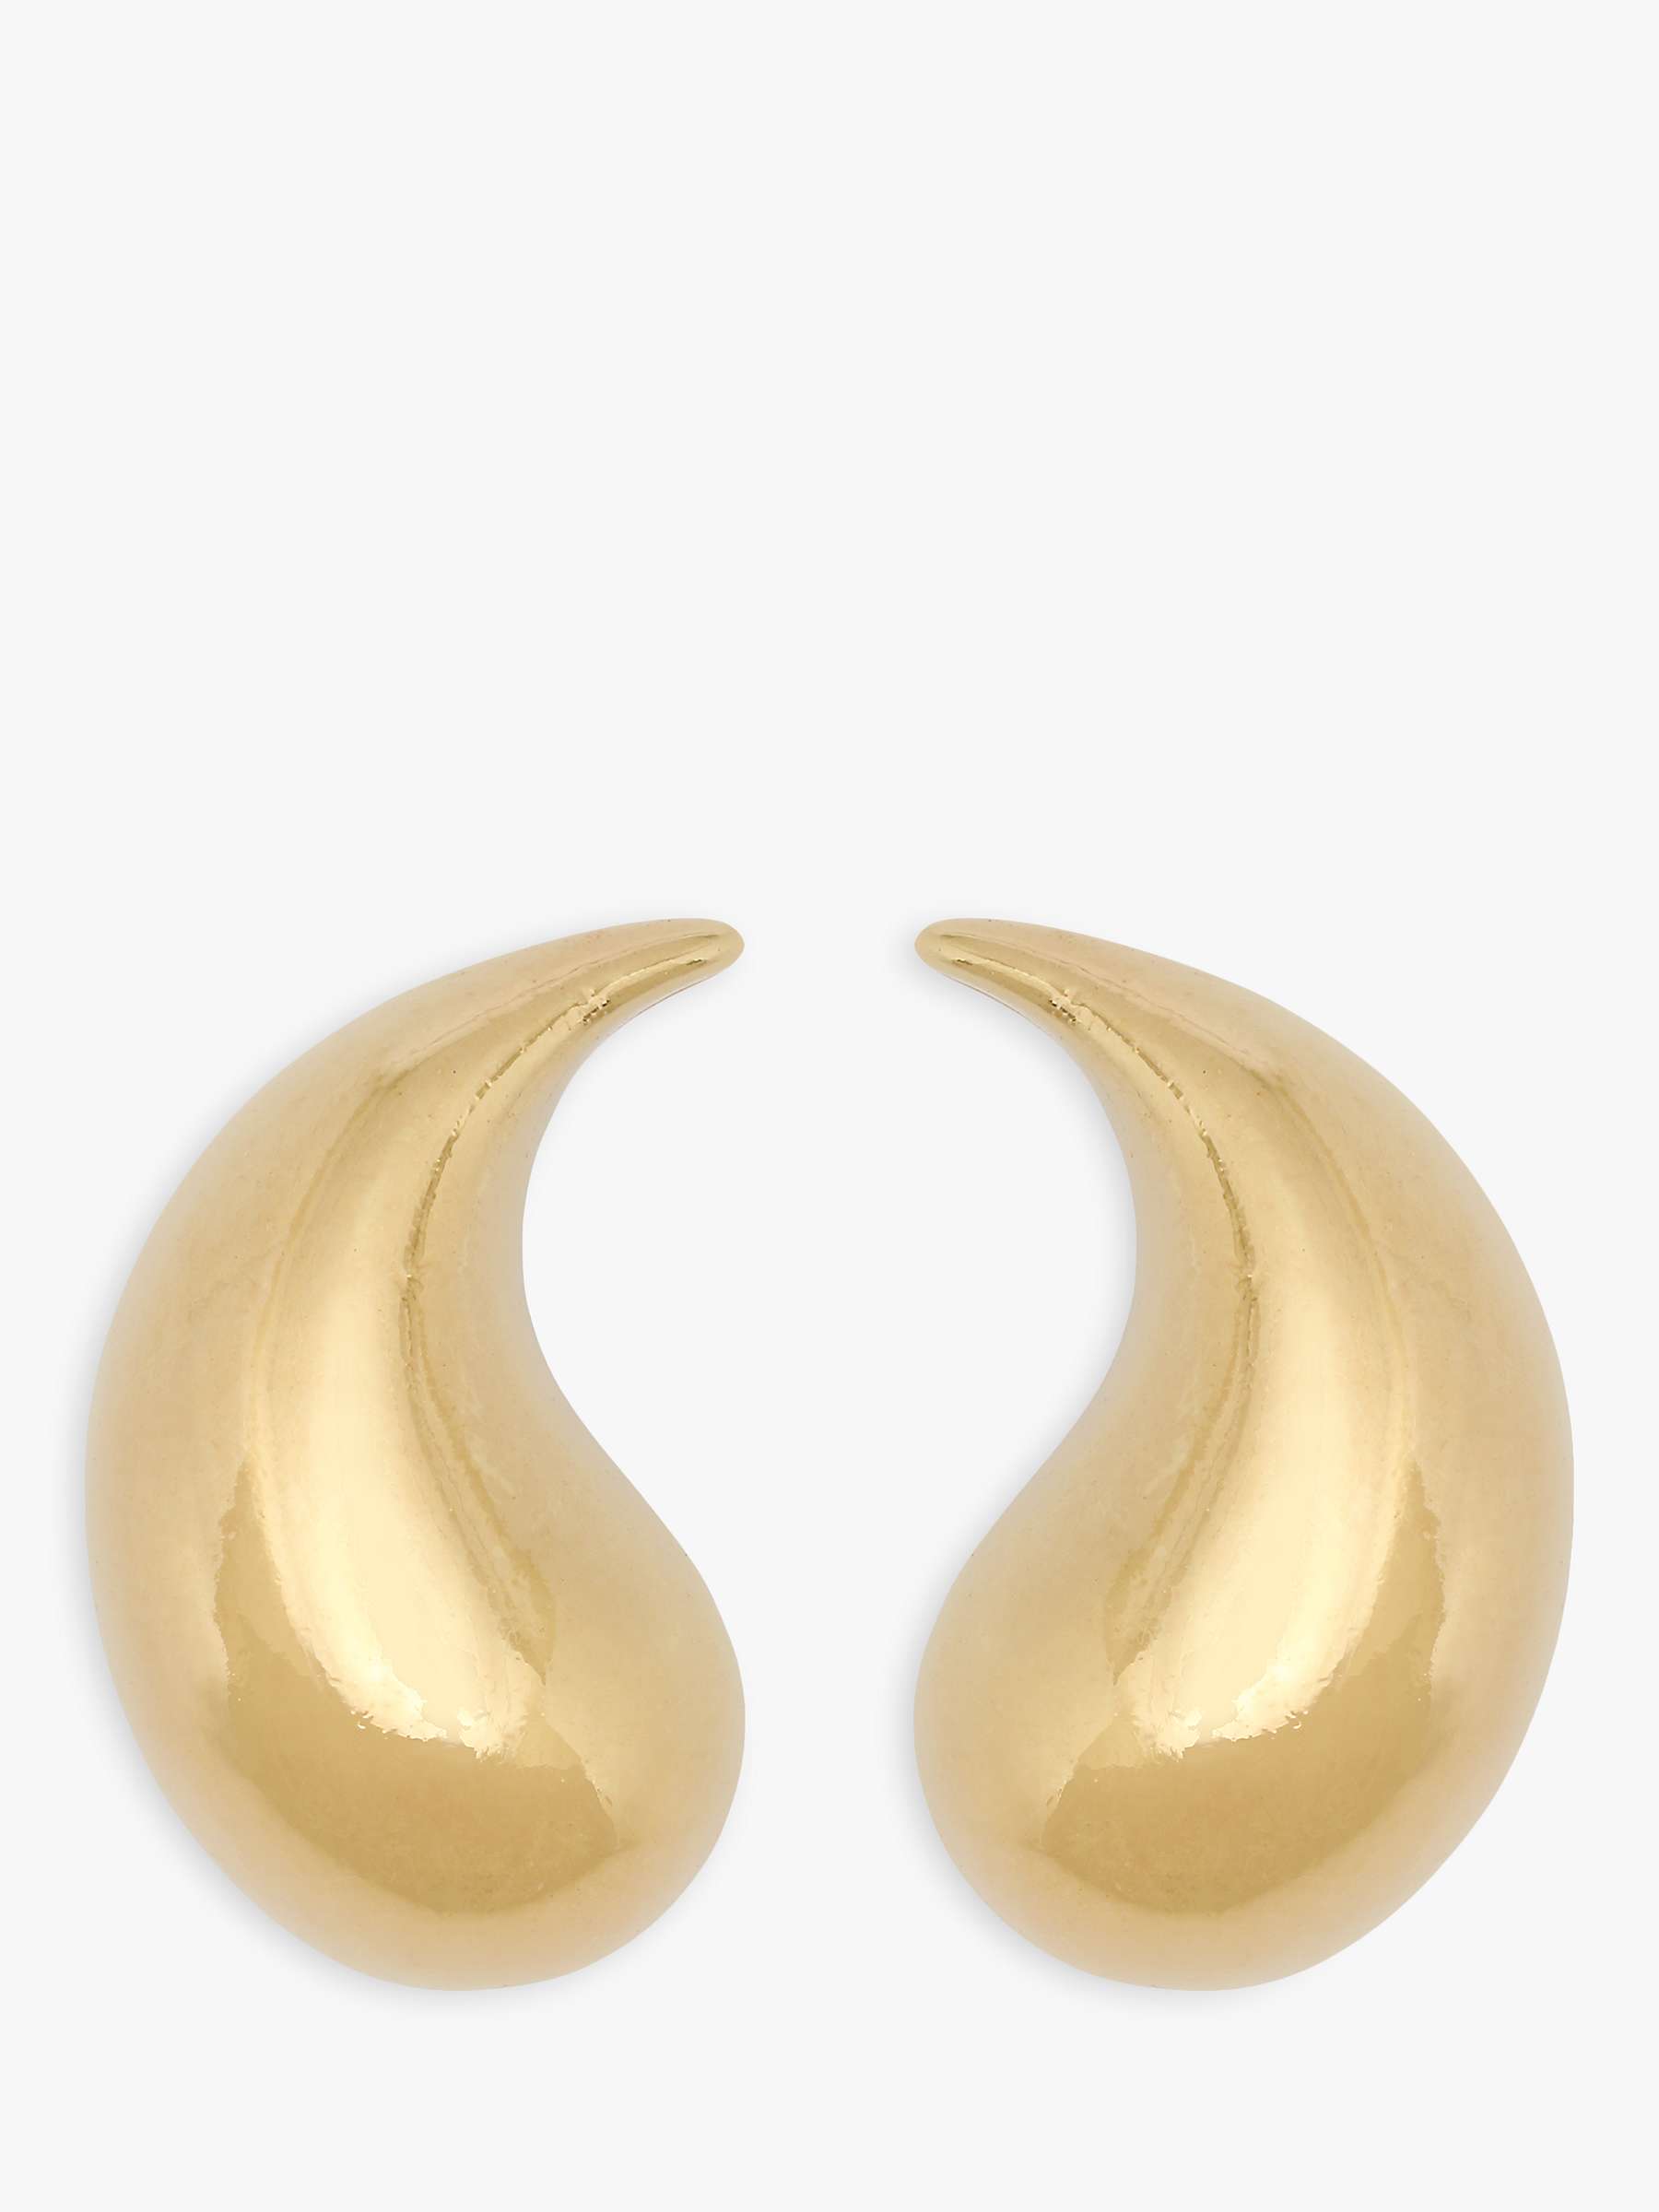 Buy Eclectica Vintage 22ct Gold Plated Clip-On Comma Earrings, Dated Circa 1980s Online at johnlewis.com